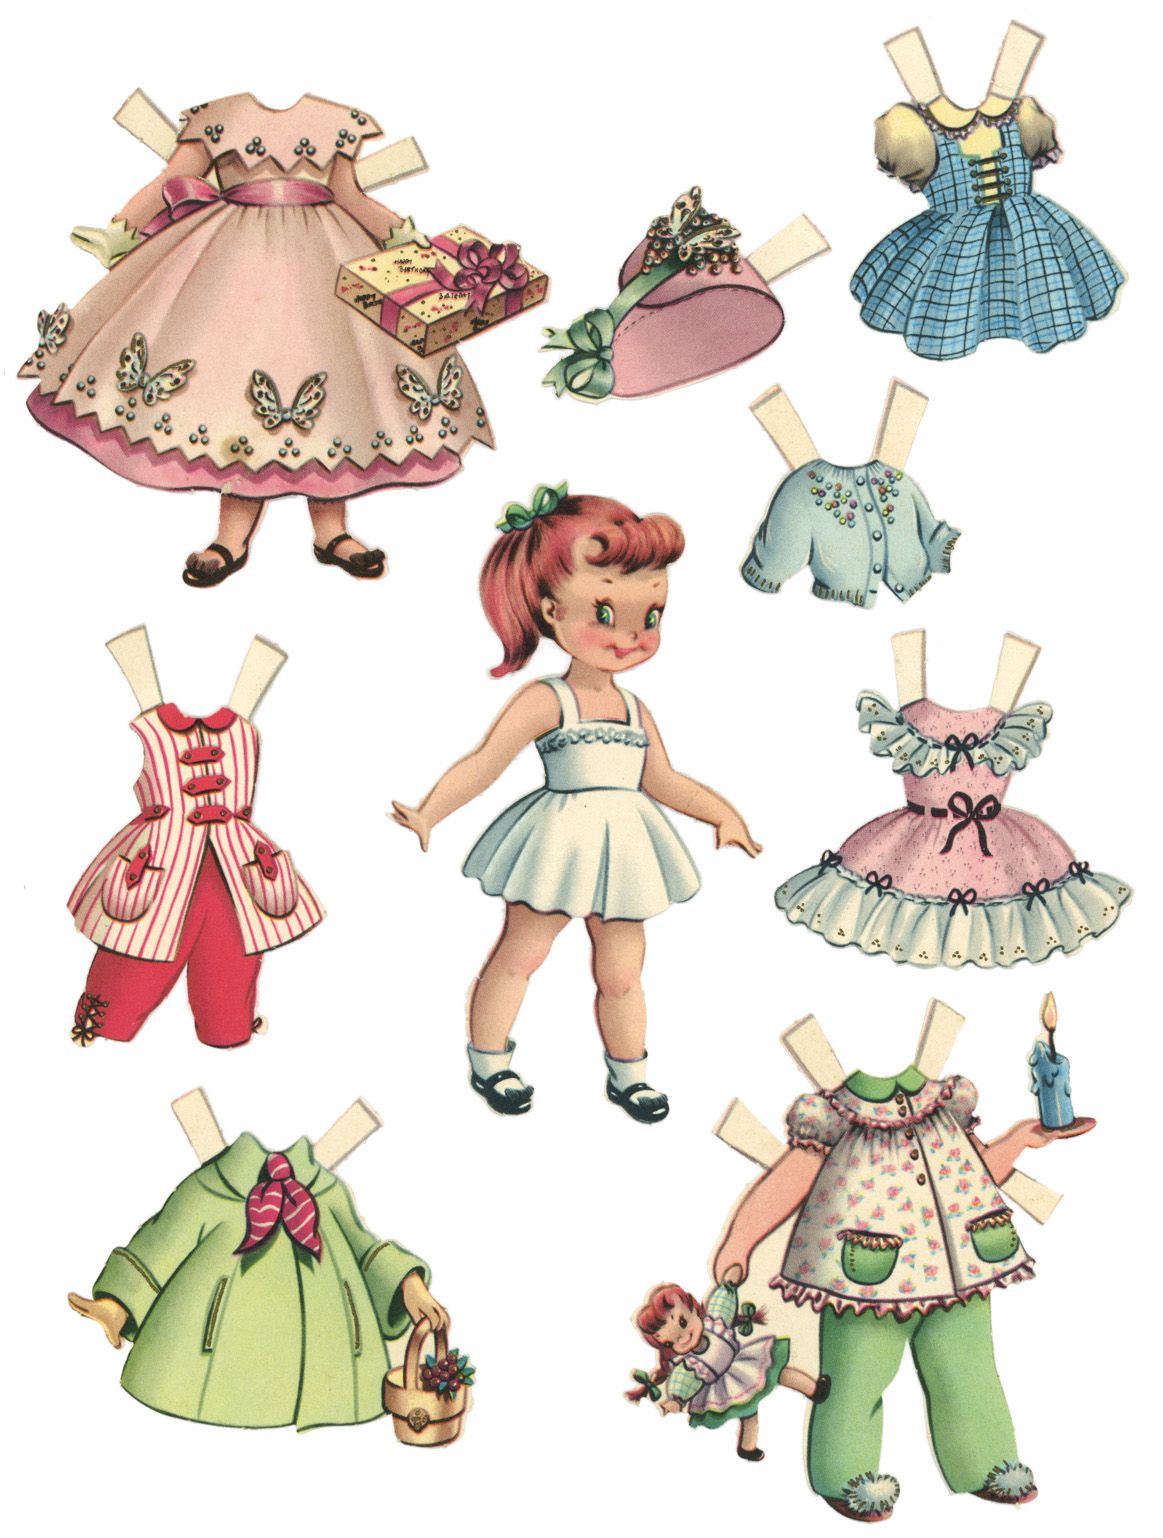 10 Free Printable Paper Dolls | Everyone Needs A Toy :) | Pinterest - Free Printable Paper Dolls